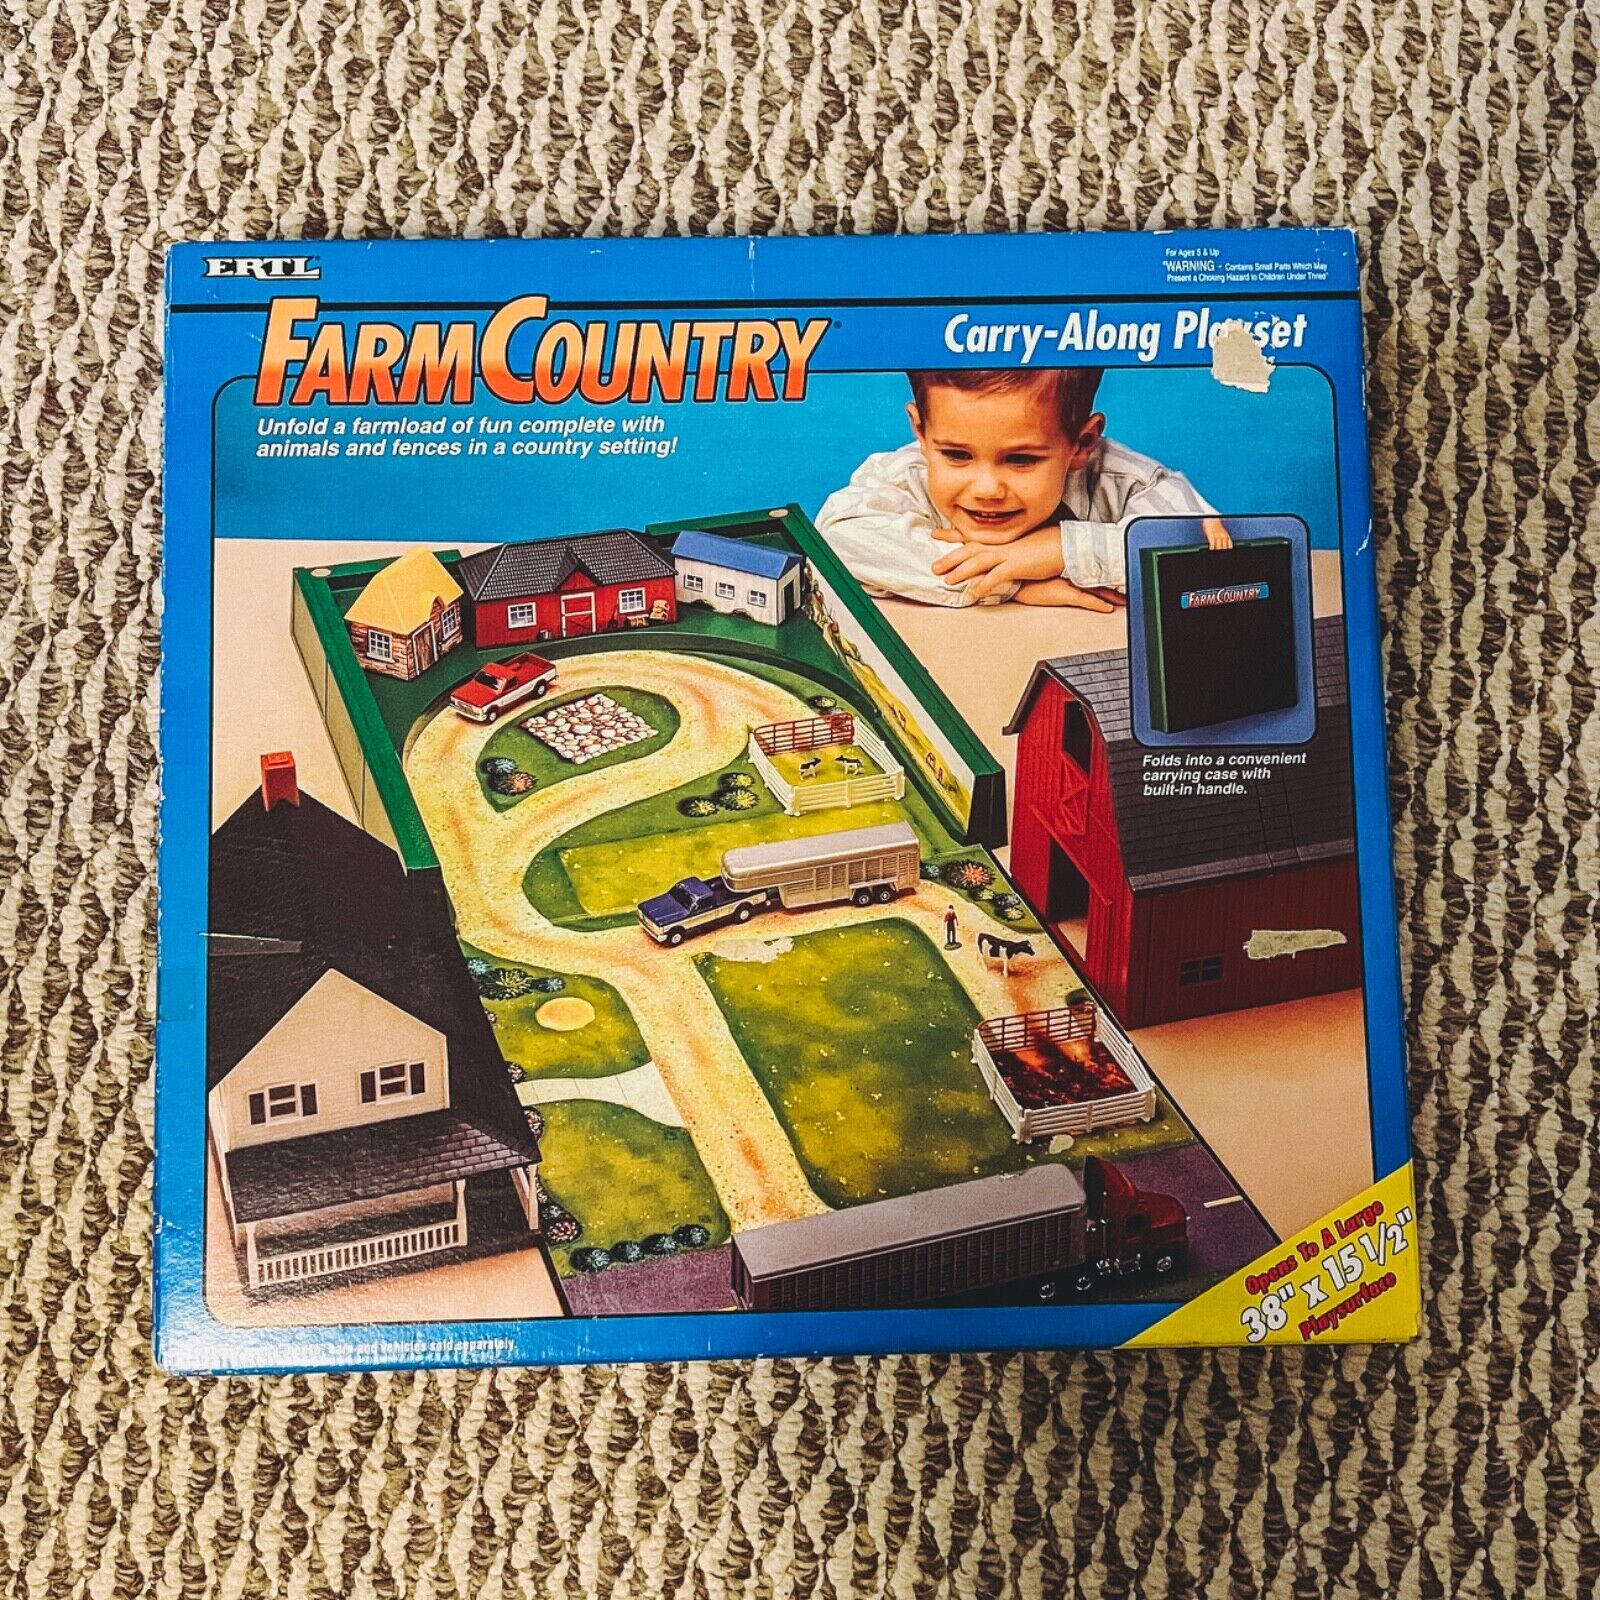 1994 ERTL Farm Country Carry Along Playset (Incomplete, See Notes)